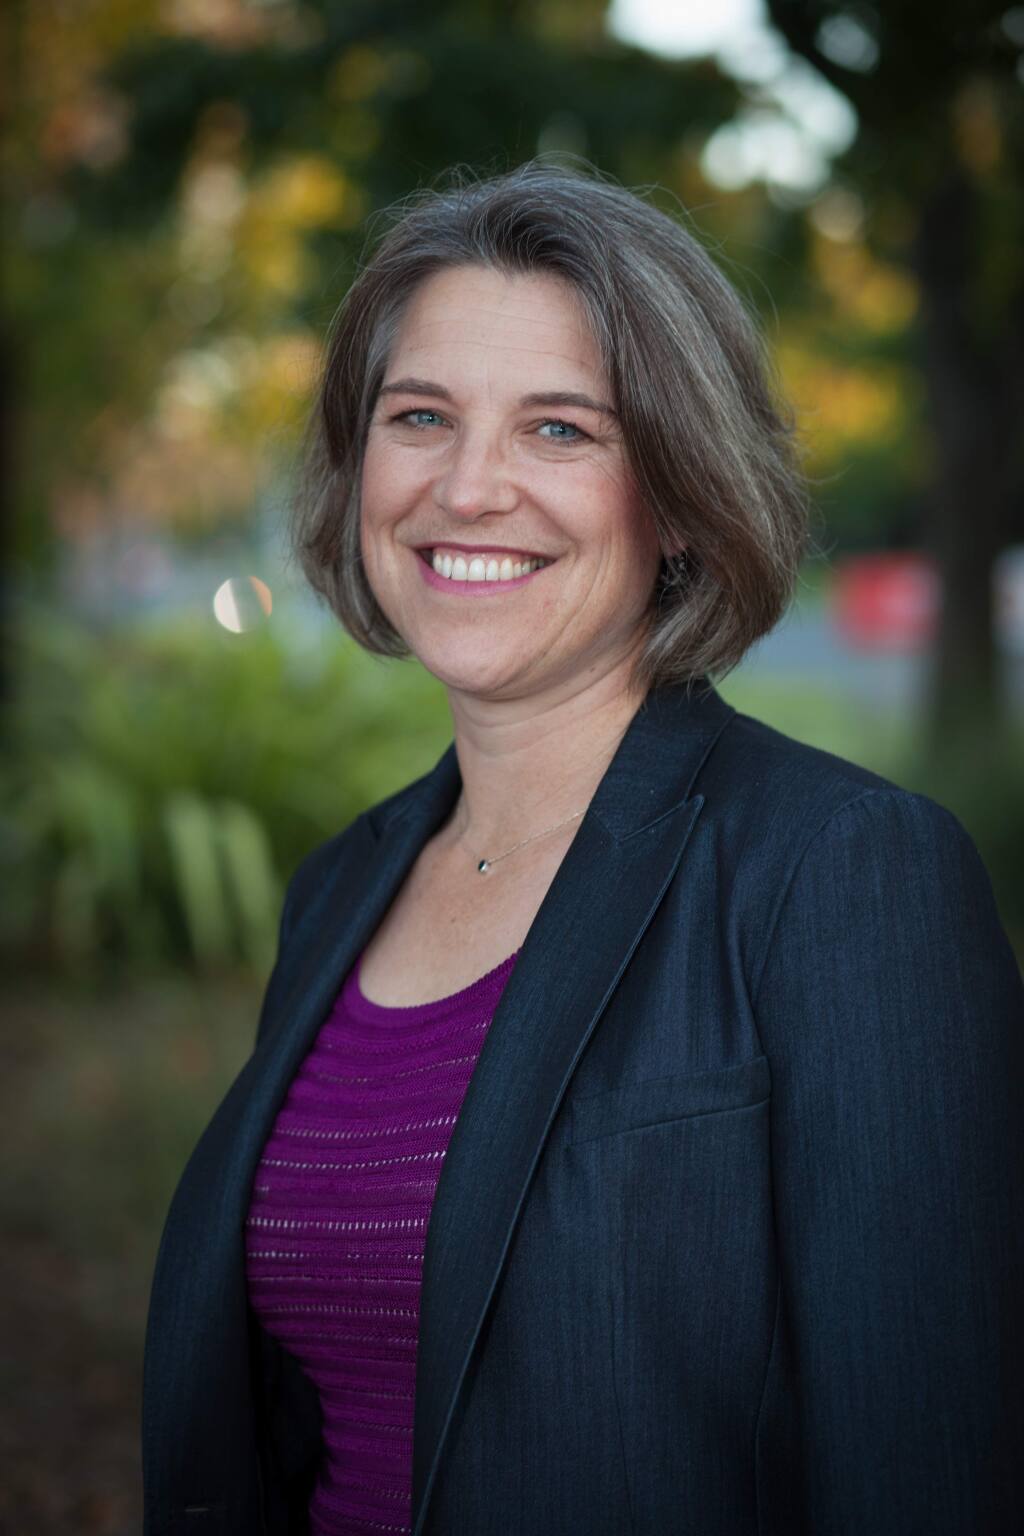 Lisa Ward, M.D., chief medical officer, Santa Rosa Community Health, Santa Rosa, is a 2019 winner of North Bay Business Journal's Women in Business Awards. (courtesy photo)